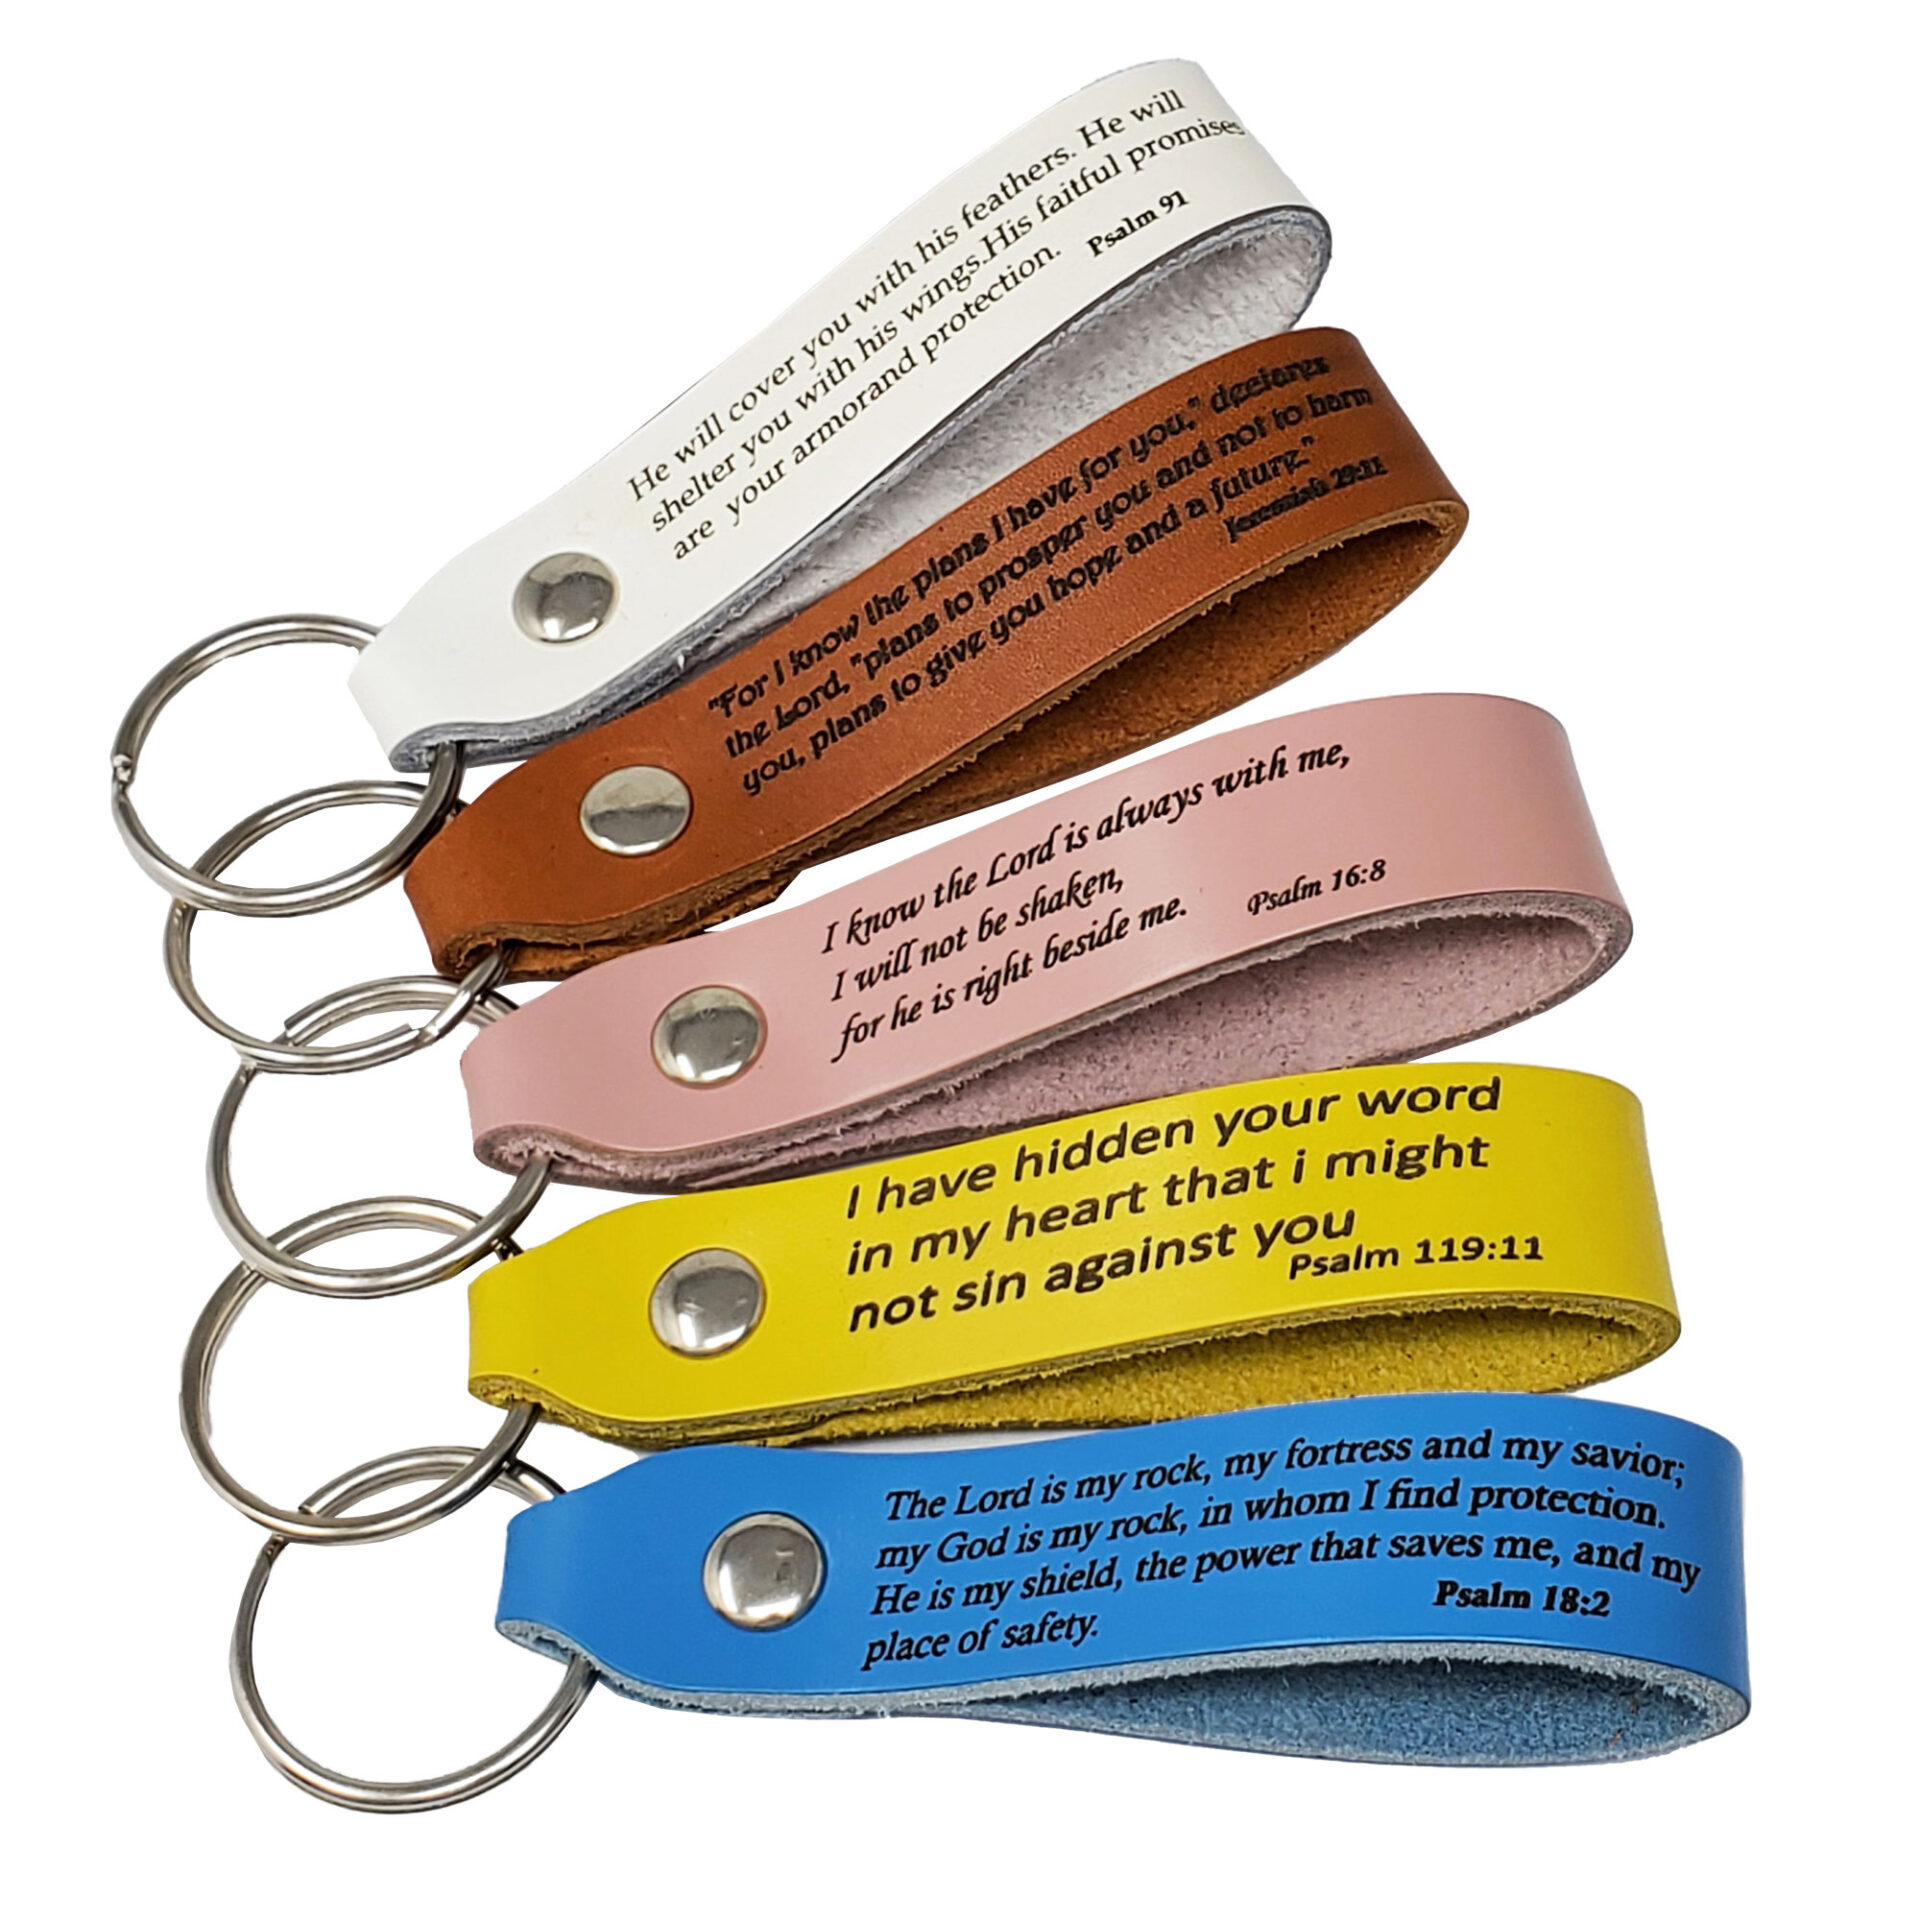  PATIKIL Leather Keychain Blanks, 4 Pack PU Leather Key Fob with  Key Rings for DIY Crafts Laser Engraving Keychain Making Leather Working,  Green : Arts, Crafts & Sewing